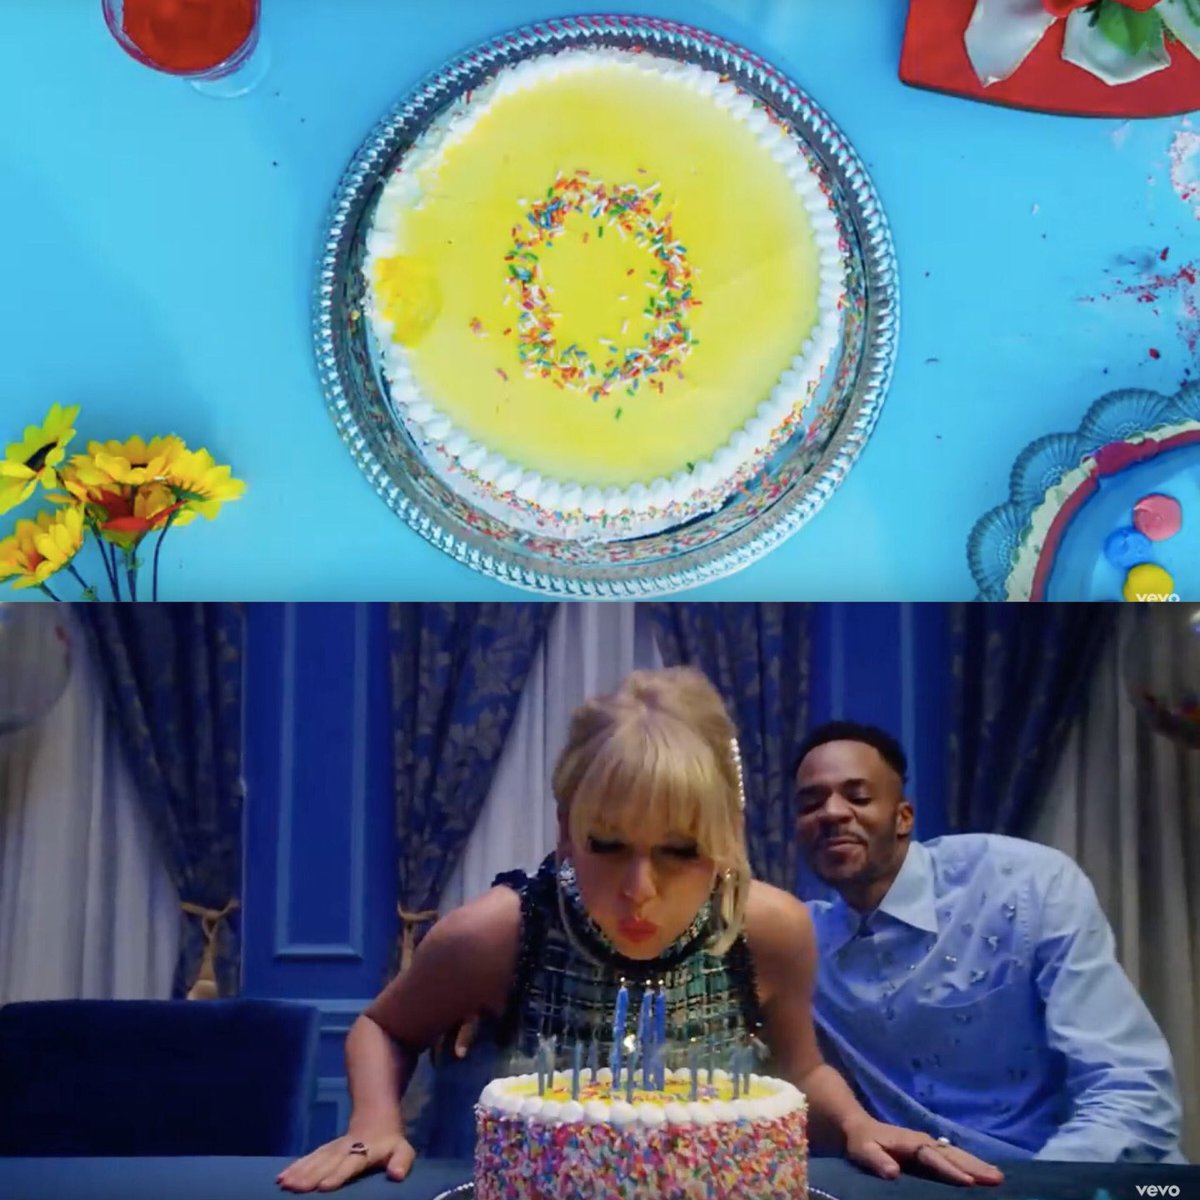 I went looking for Heavenly clues on  @abiander’s insta & realized:The cake, & burger+fries, were a clue for YNTCD. But Taylor said “LAYERS of Easter Eggs” -every clue can have more than one meaning. One of the cakes appears again in Lover, so there were two. Two cakes=2 albums.